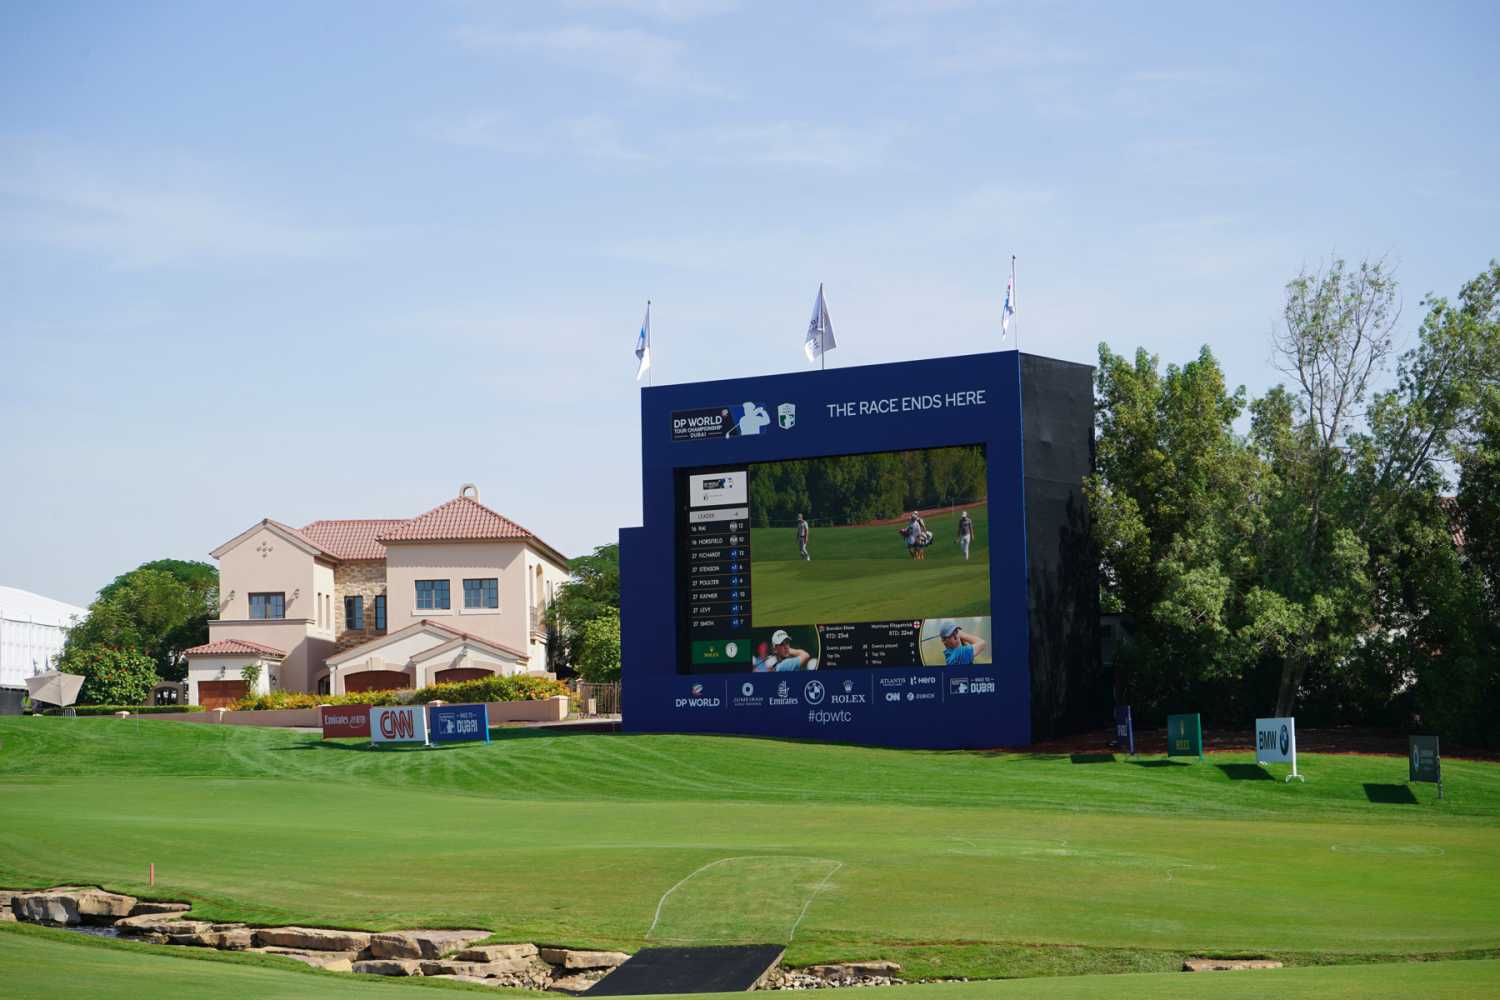 The four-day event, held at Jumeirah Golf Estates